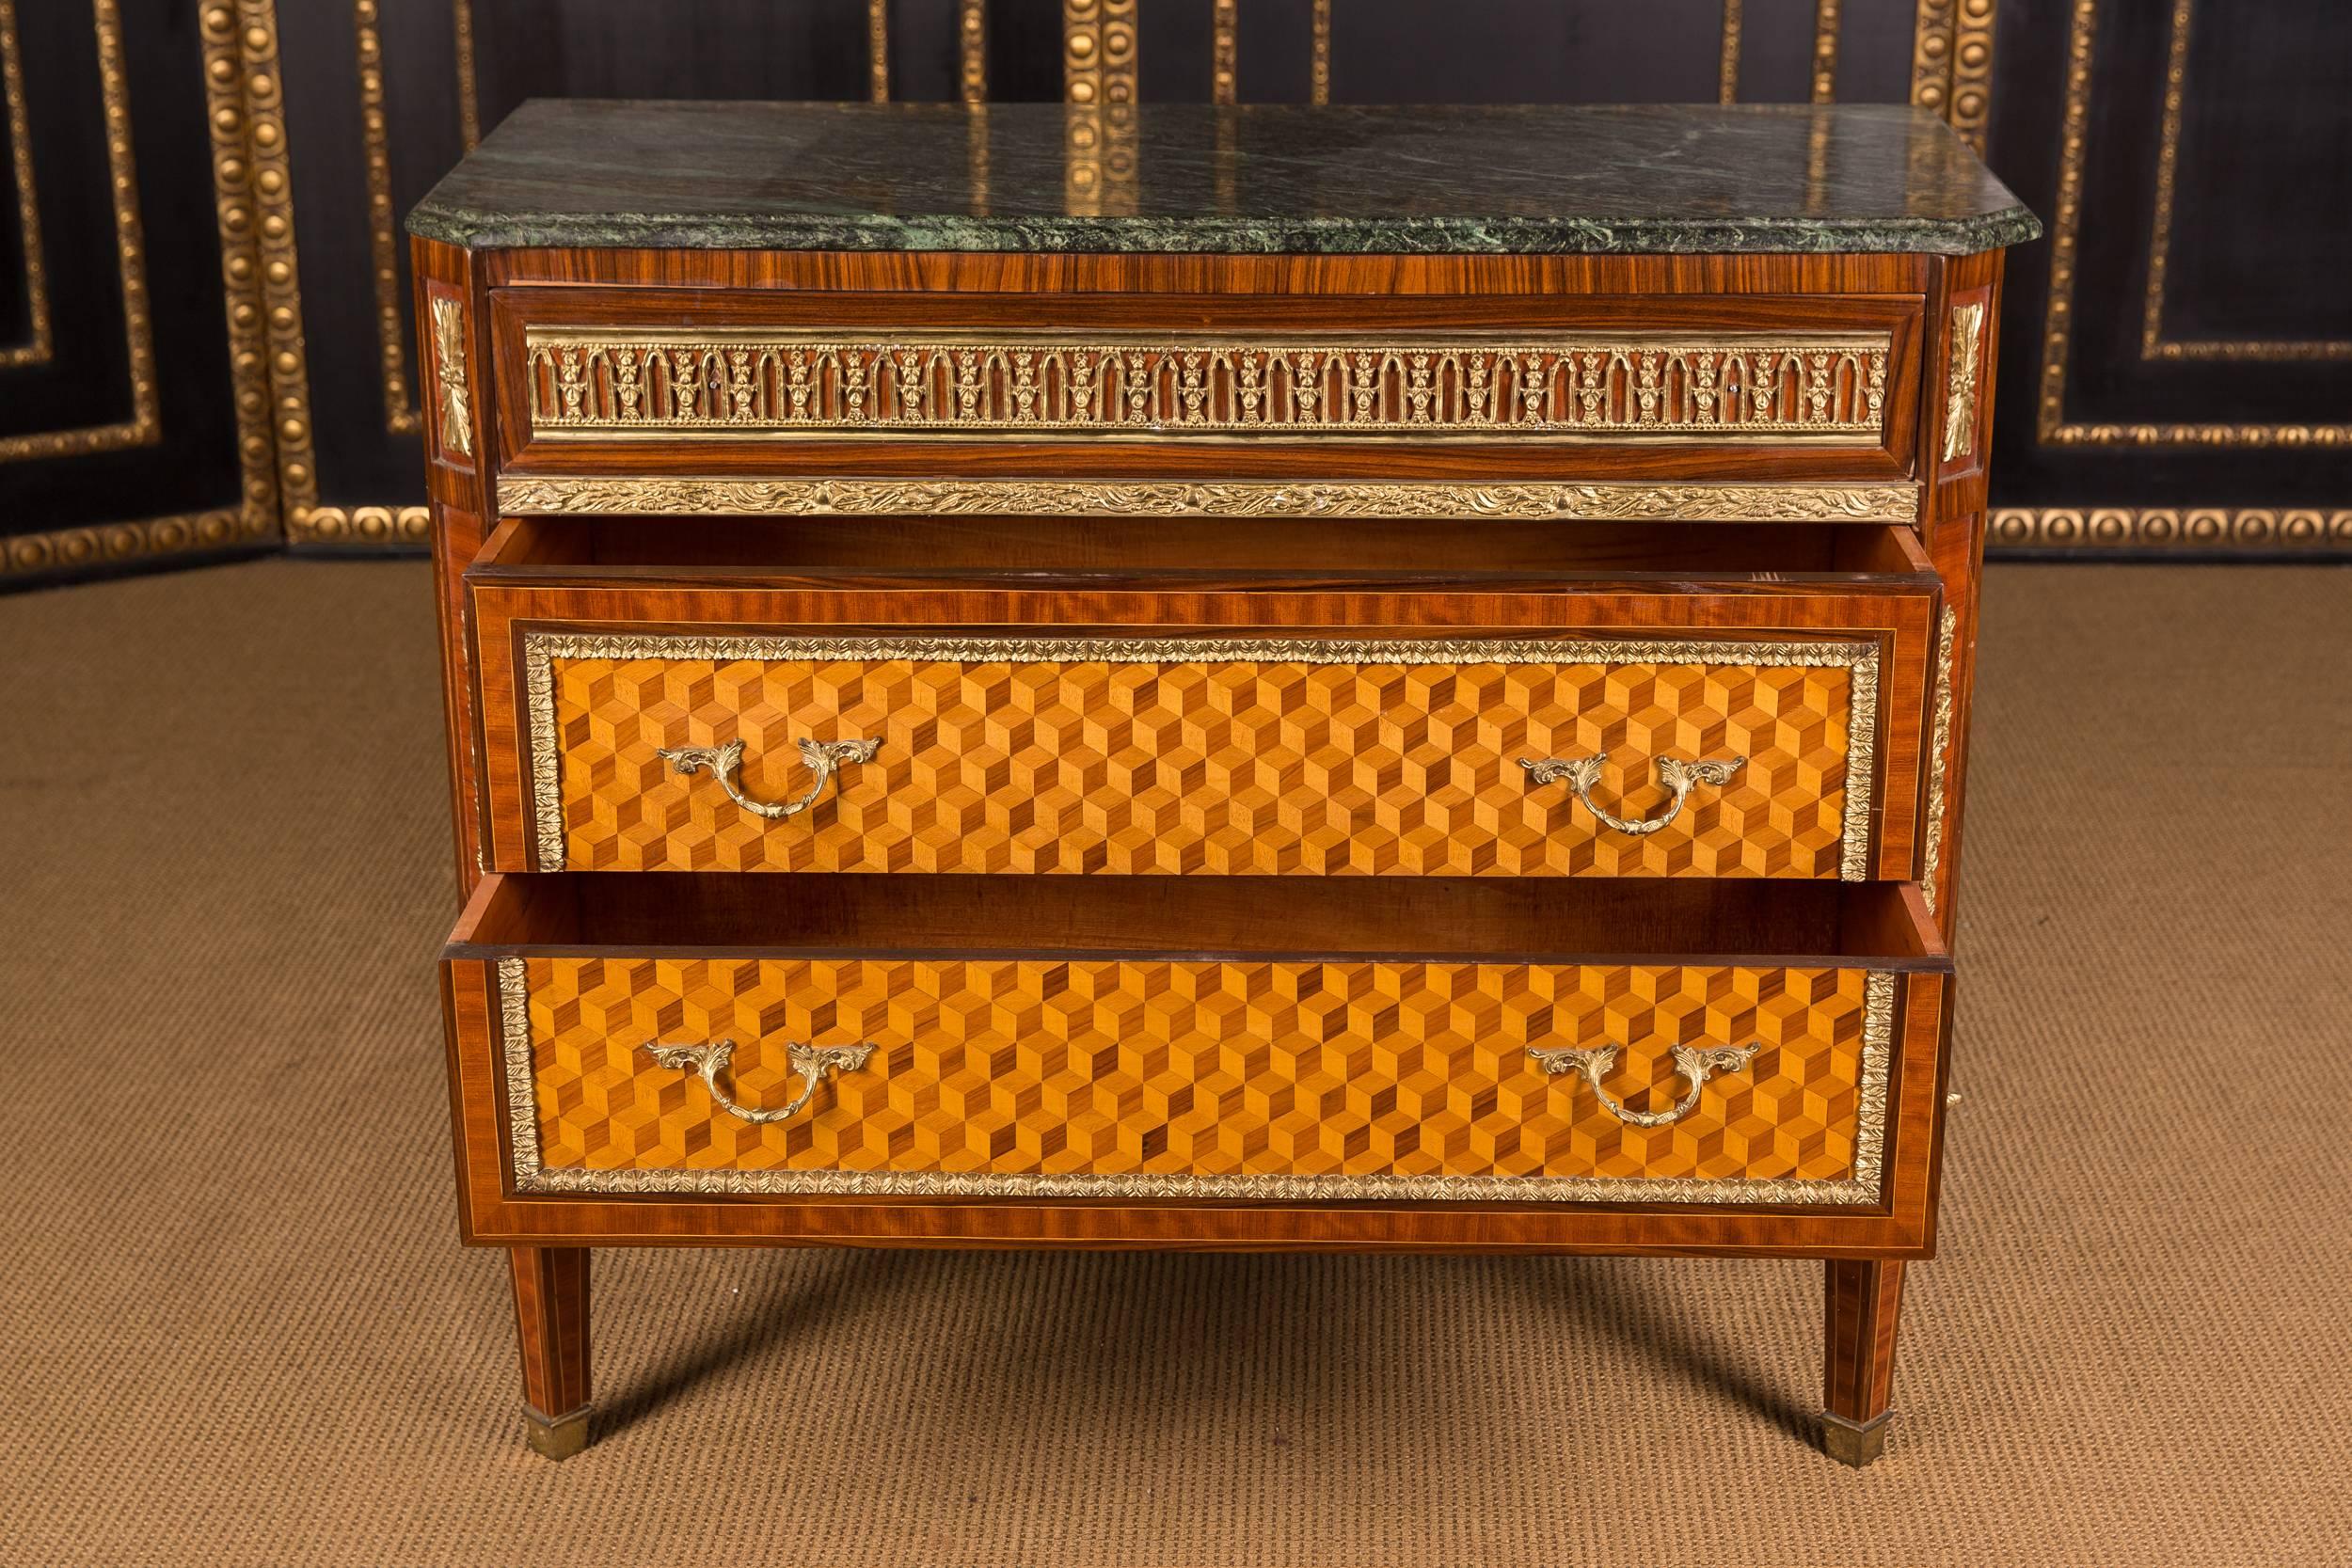 Louis XVI Beautiful Elegant Chest of Drawers with Marble Top in Louis Seize Style